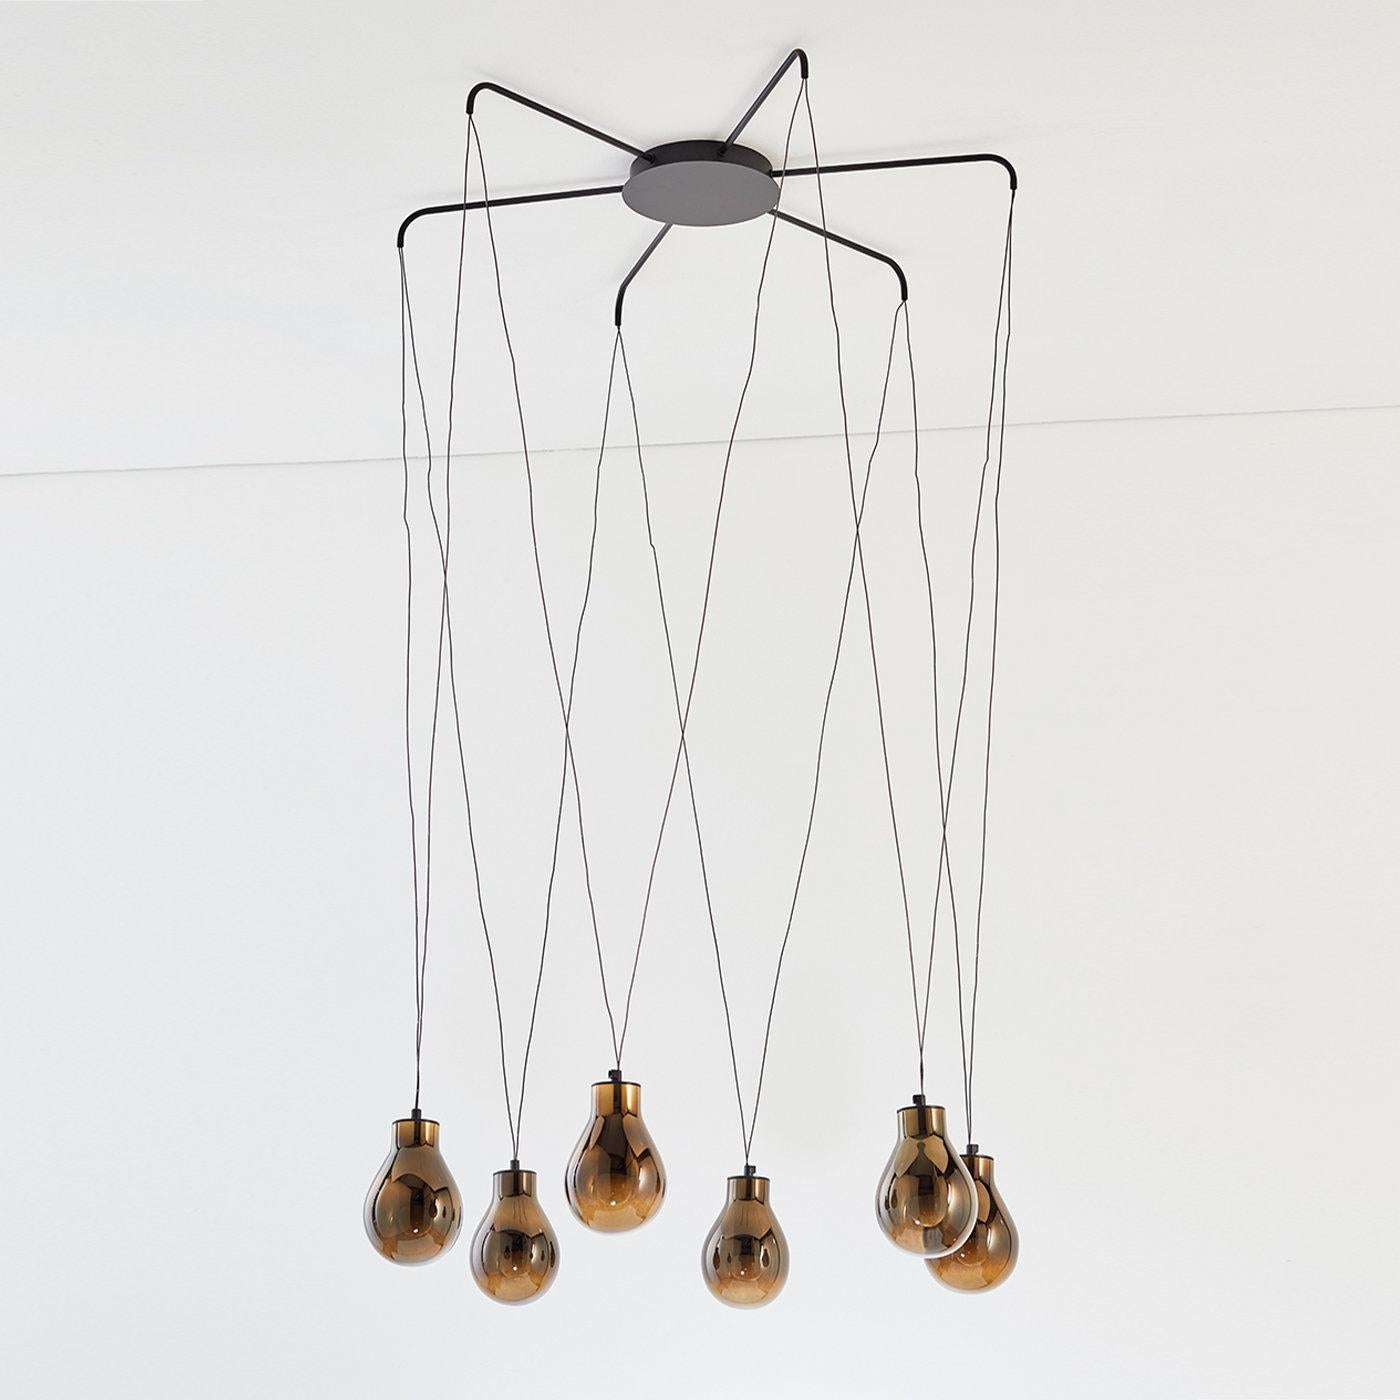 Part of an extremely elegant collection of minimalist design, this chandelier draws inspiration from the evocative character of rain. Light and sleek, it features a matte black metal structure from which hang six pairs of V-shaped threads ending